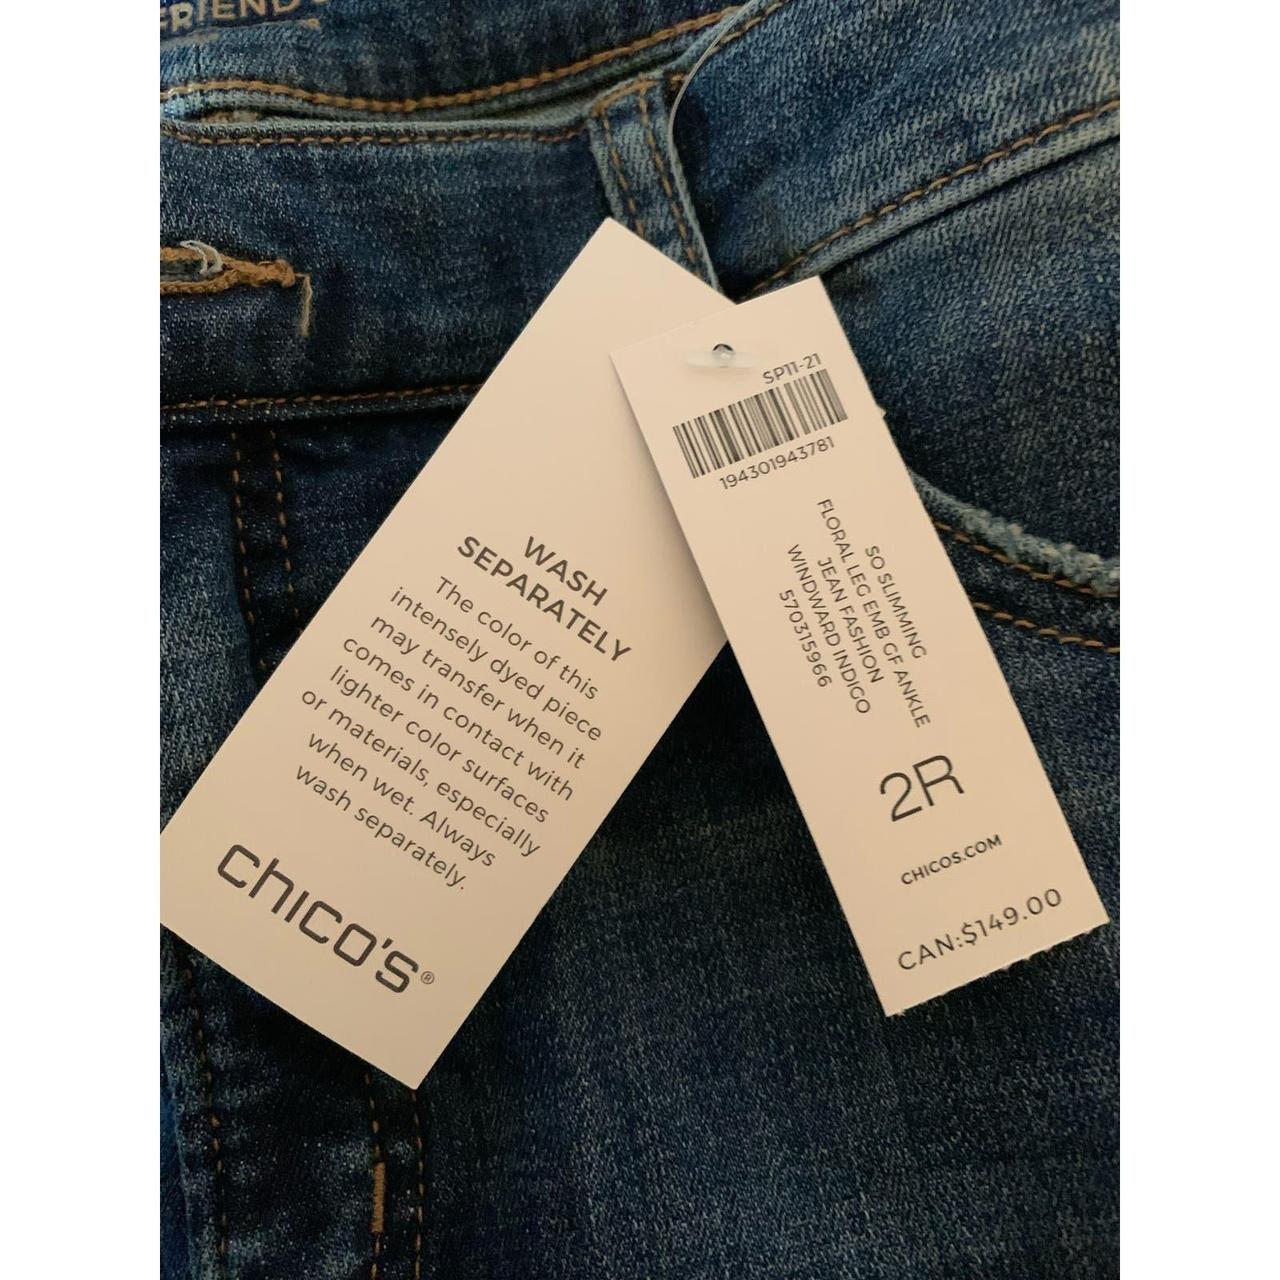 SO SLIMMING Chico's Floral-Embroidered Girlfriend Ankle Jeans